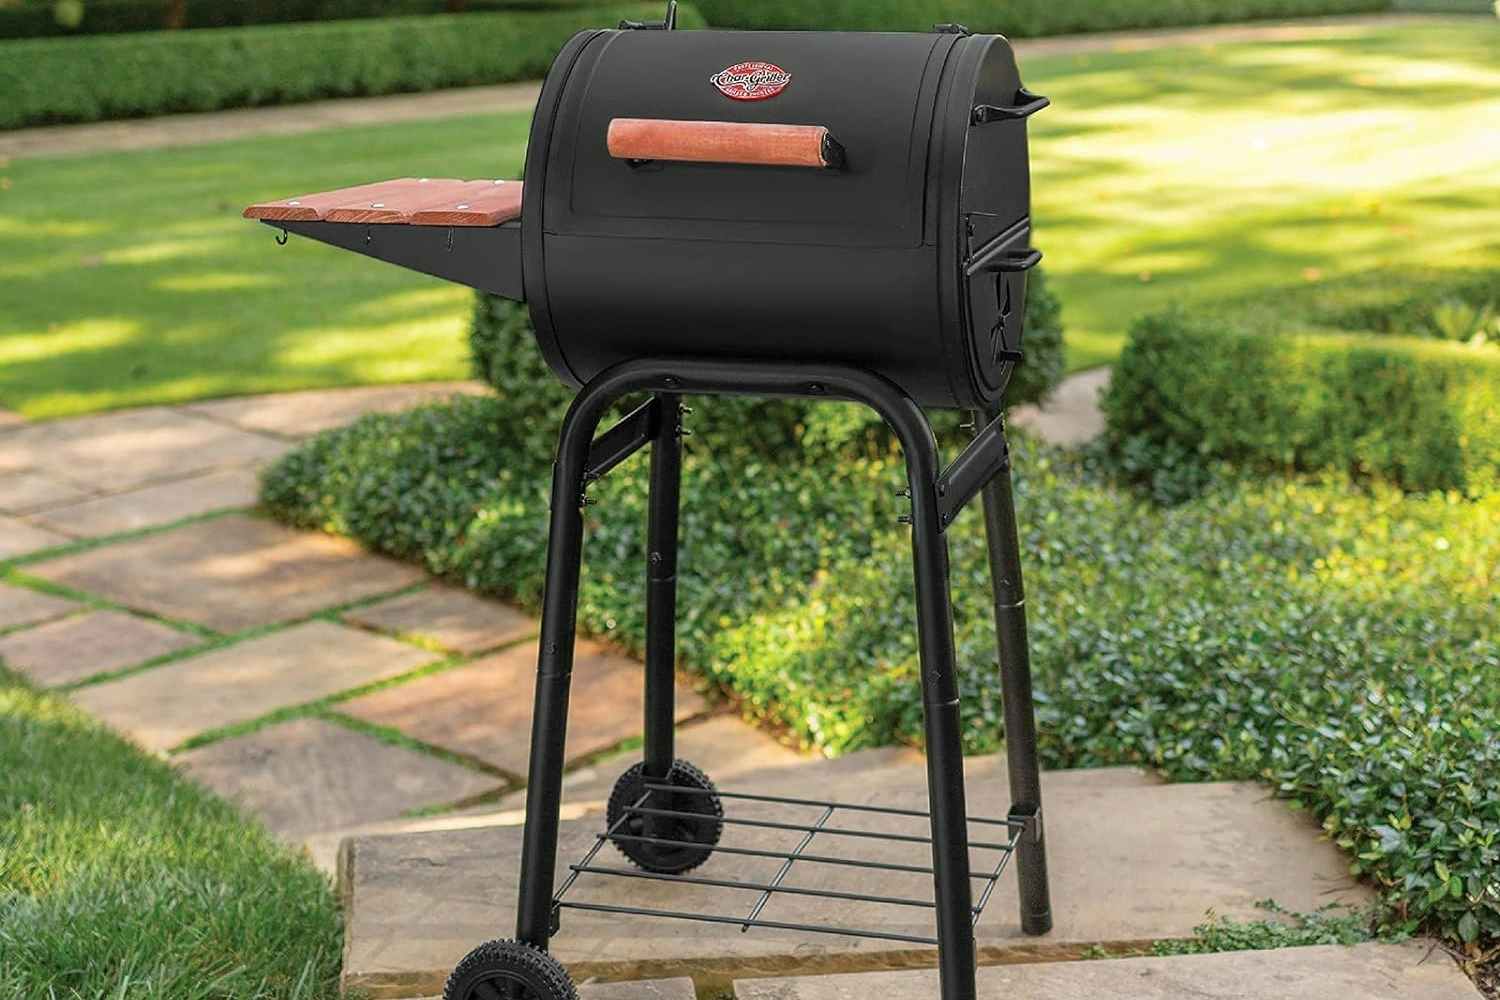 Char-Griller Charcoal Grill and Smoker, $69.98 on Amazon (Reg. $100)